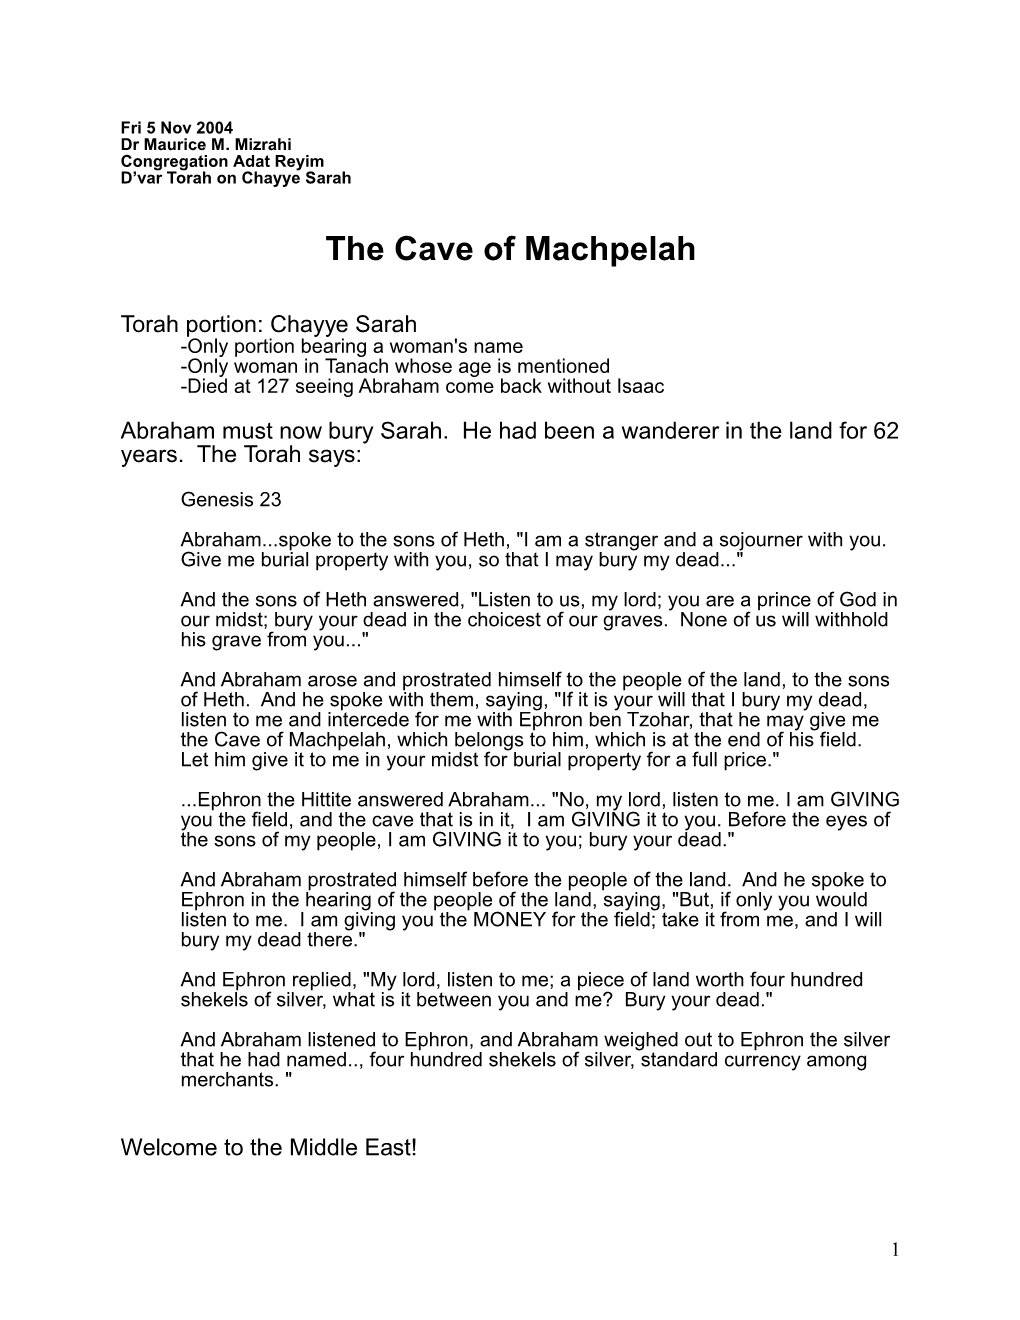 The Cave of Machpelah